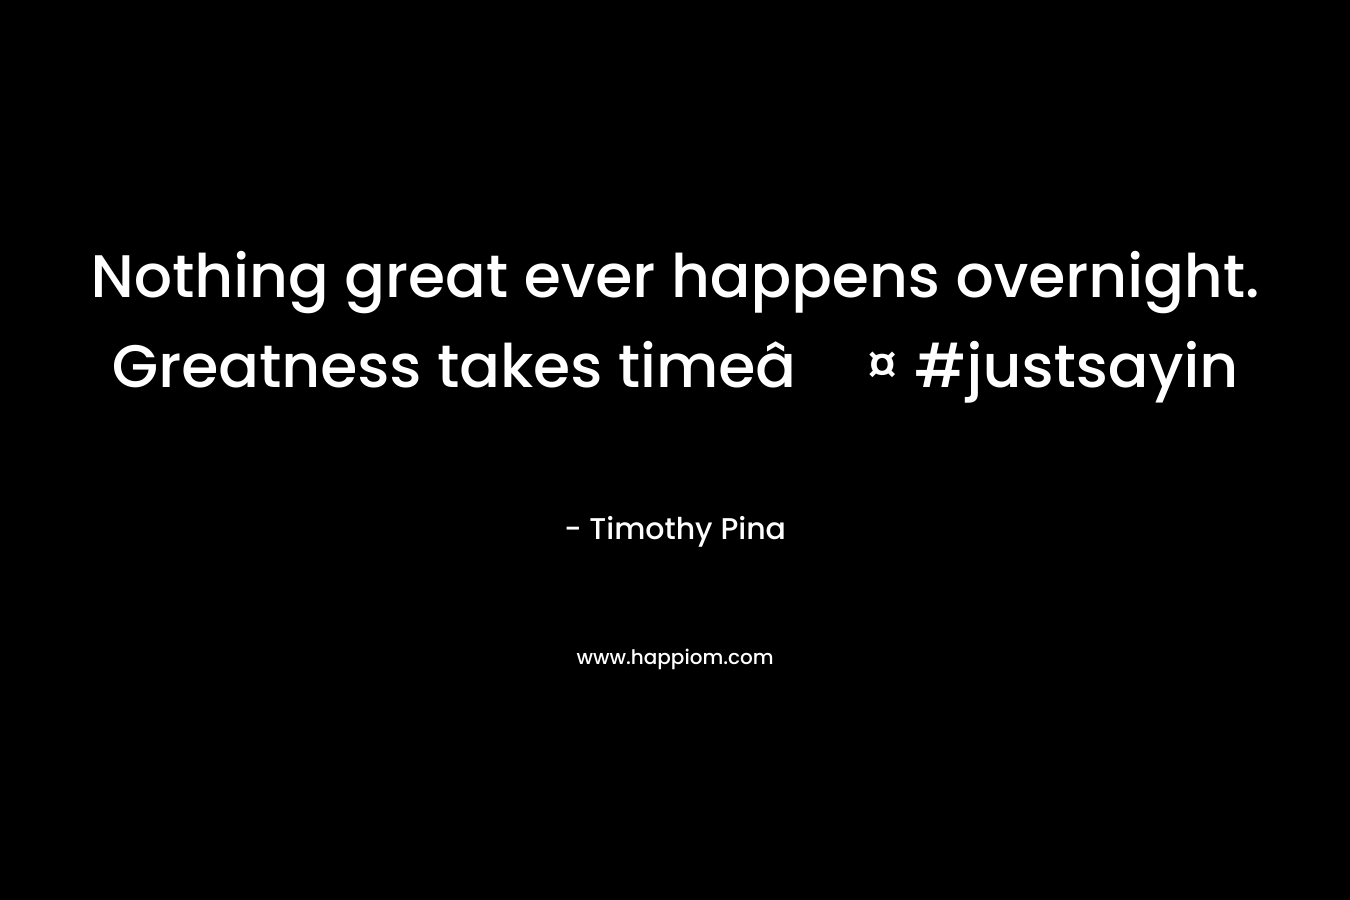 Nothing great ever happens overnight. Greatness takes timeâ¤ #justsayin